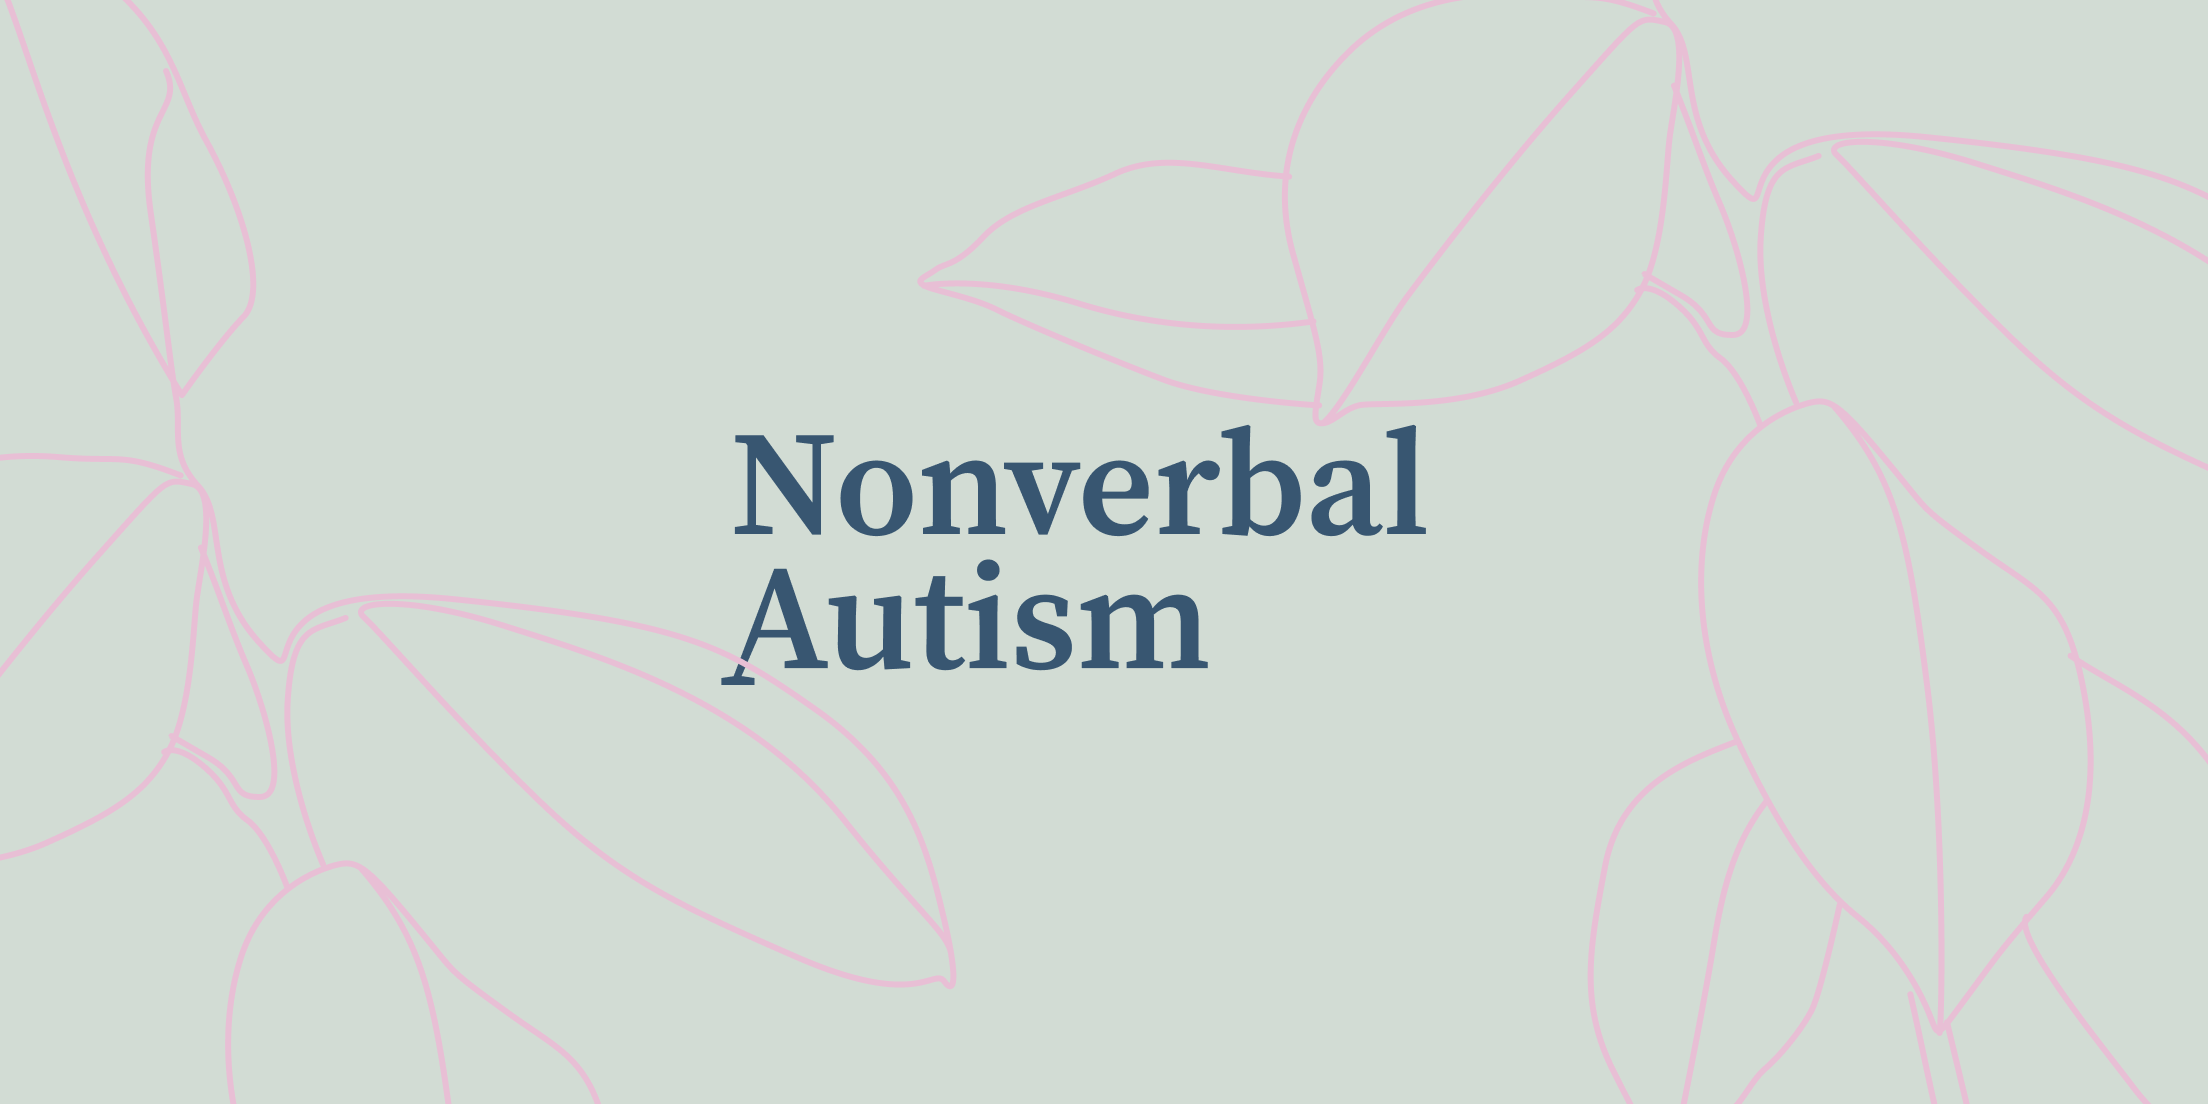 Nonverbal Autism: What It Is & Modern Treatment Options